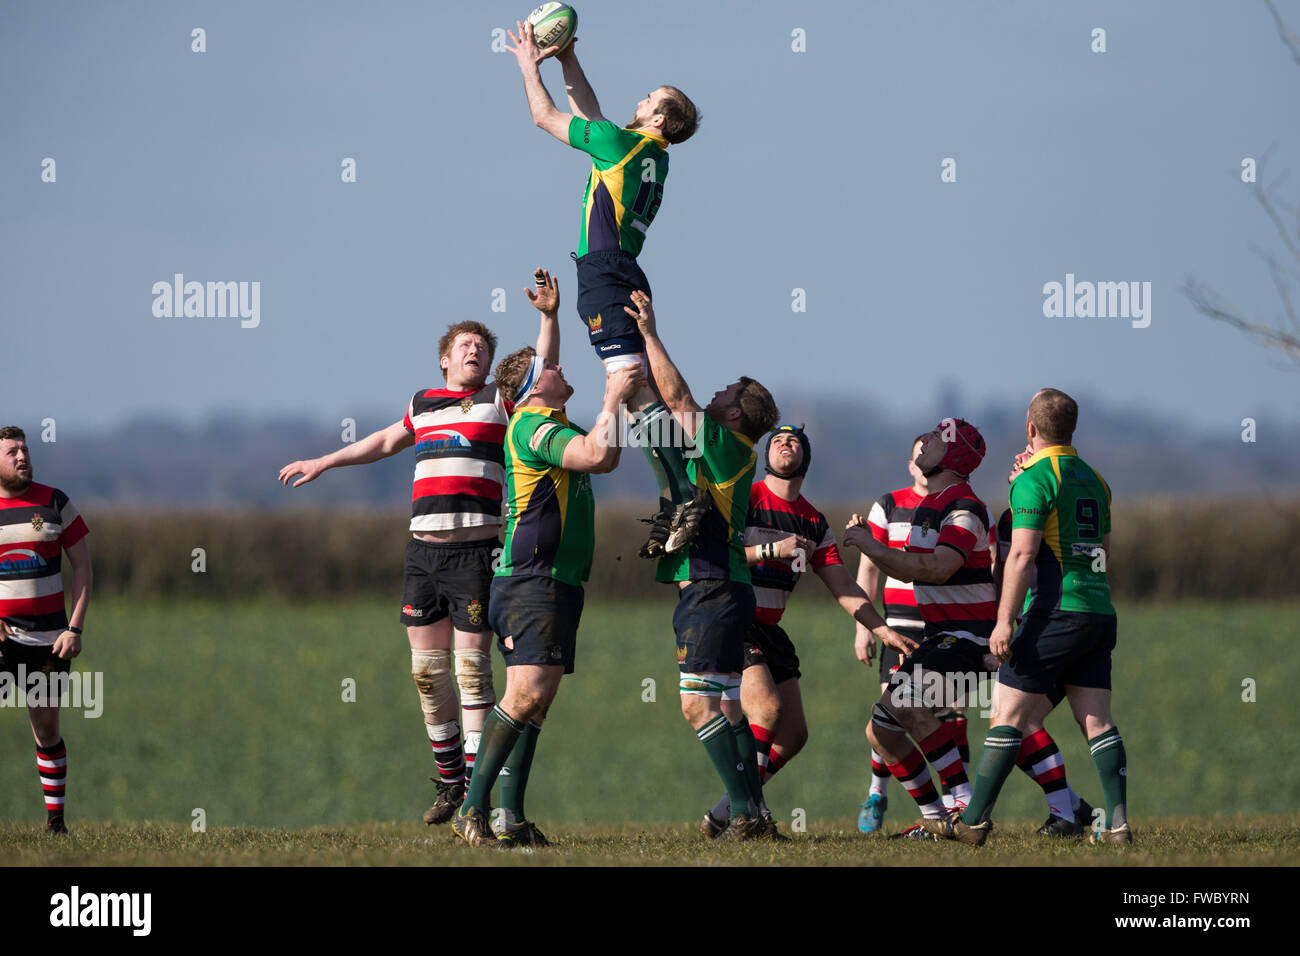 NDRFC 1st XV versus Frome RFC 1st XV,  David Marsh of NDRFC catching ball in line out. Stock Photo